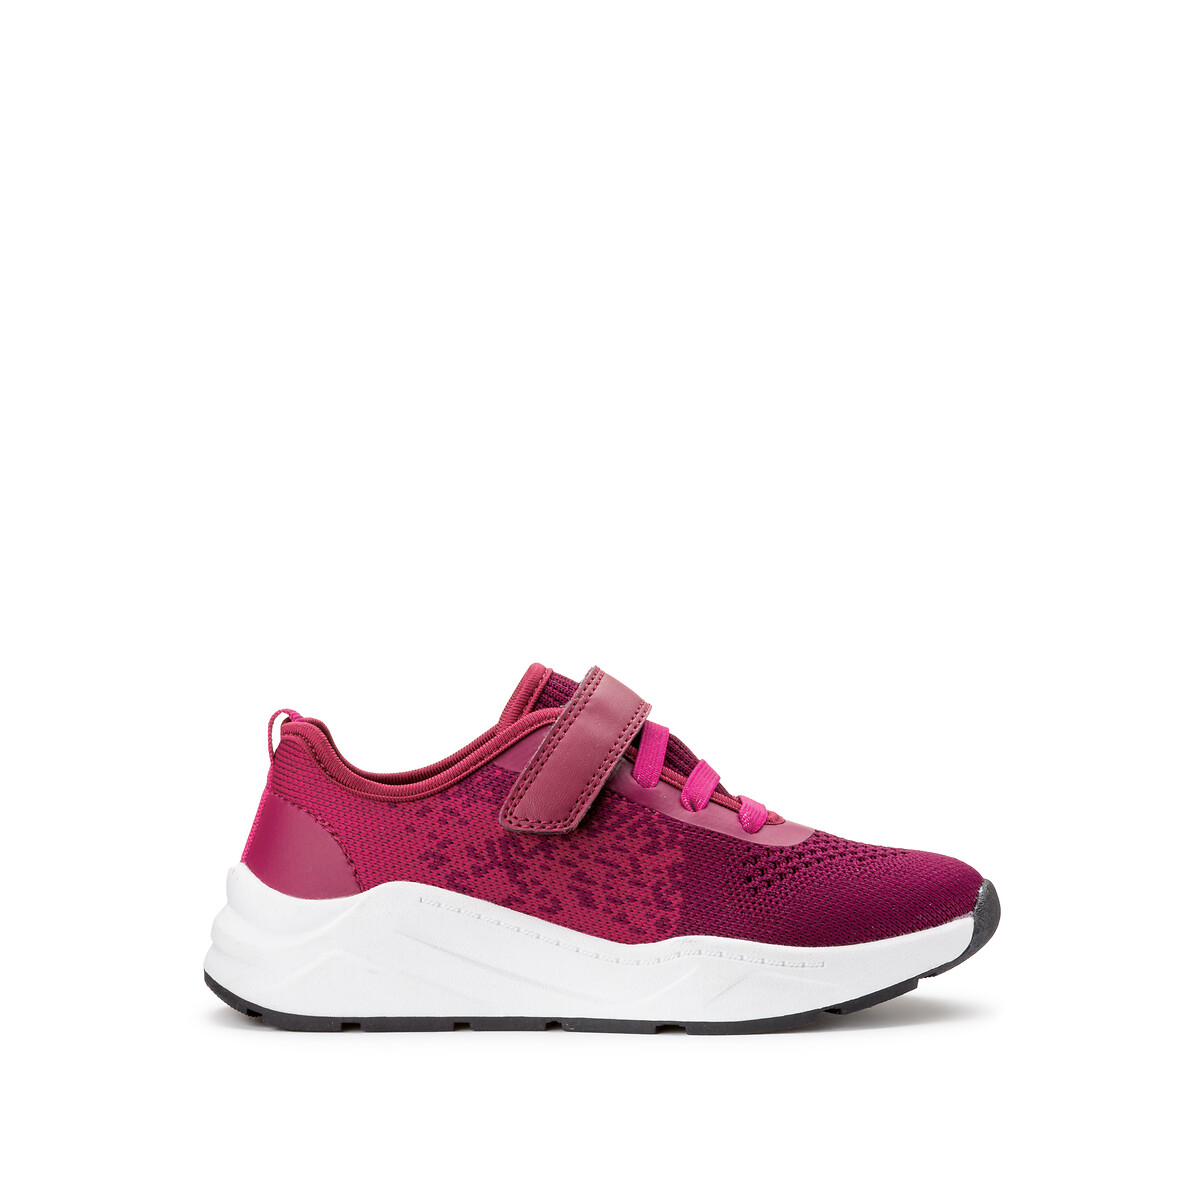 Kids running trainers , pink, La Redoute Collections | La Redoute